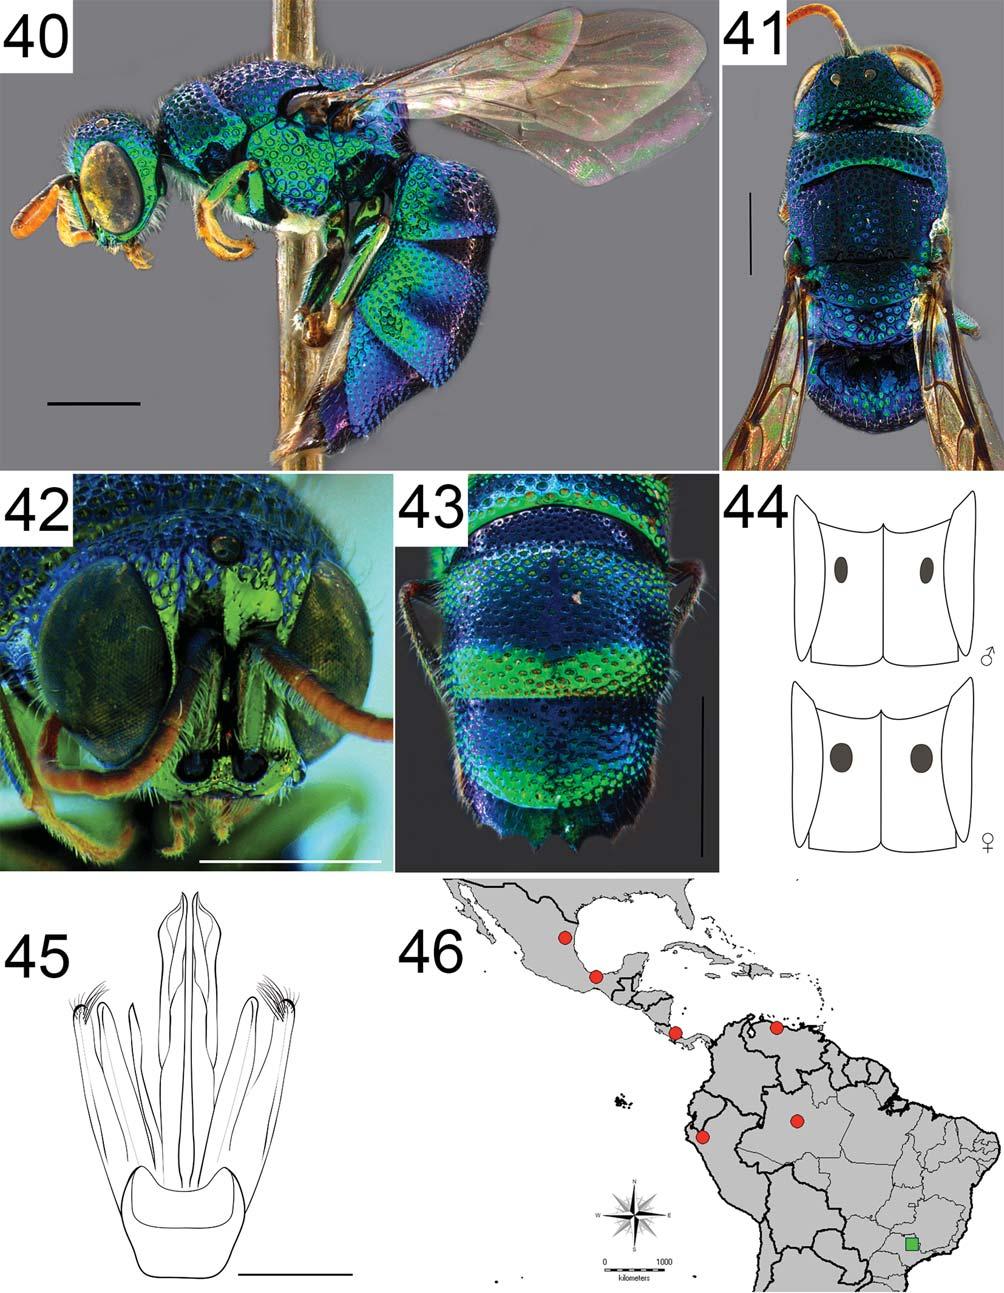 FIGURES 40 46. Ipsiura covillei, paratype. 40. Habitus, lateral view. 41. Dorsum of mesosoma, dorsal view. 42. Head, frontal view. 43. T3, postero-dorsal view. Scale bar = 1 mm. 44.